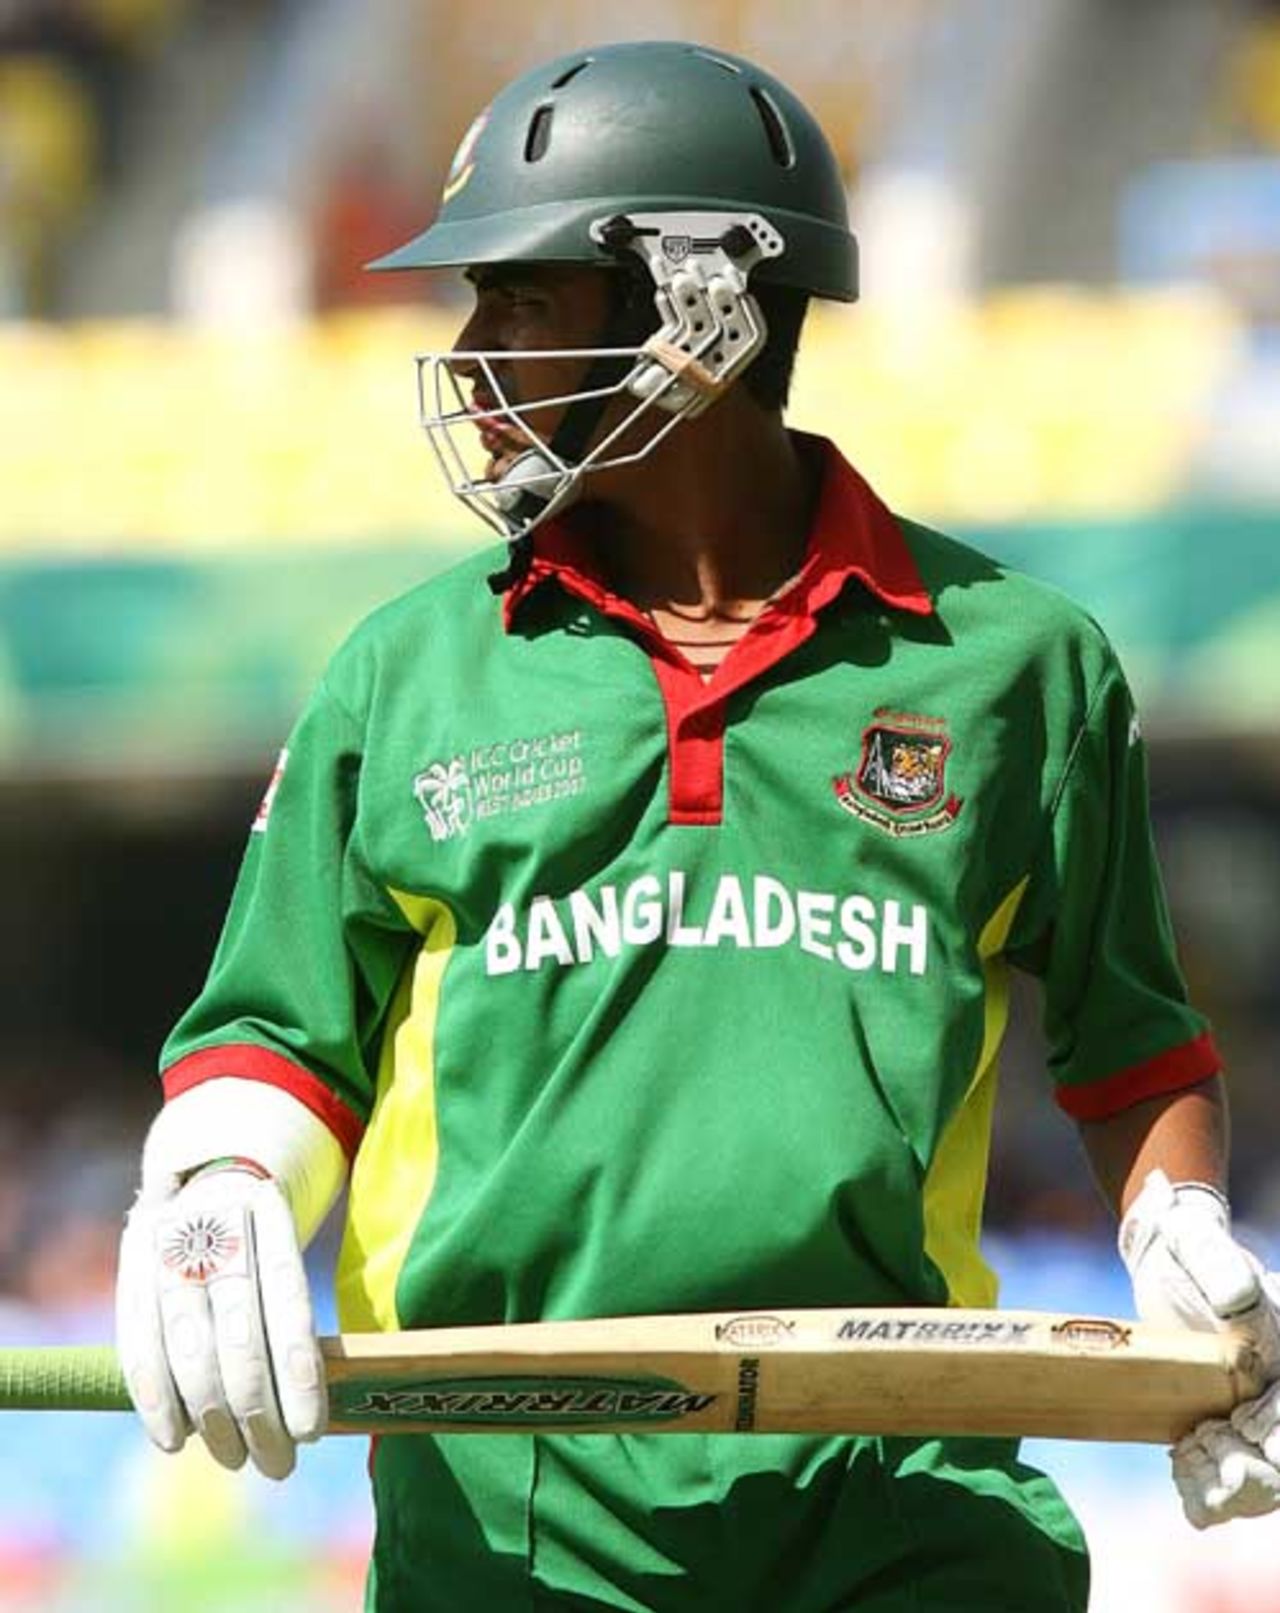 Tamim Iqbal walks back after his poor slog ended up in mid-off's hands, Australia v Bangladesh, Super Eights, Antigua, March 31, 2007